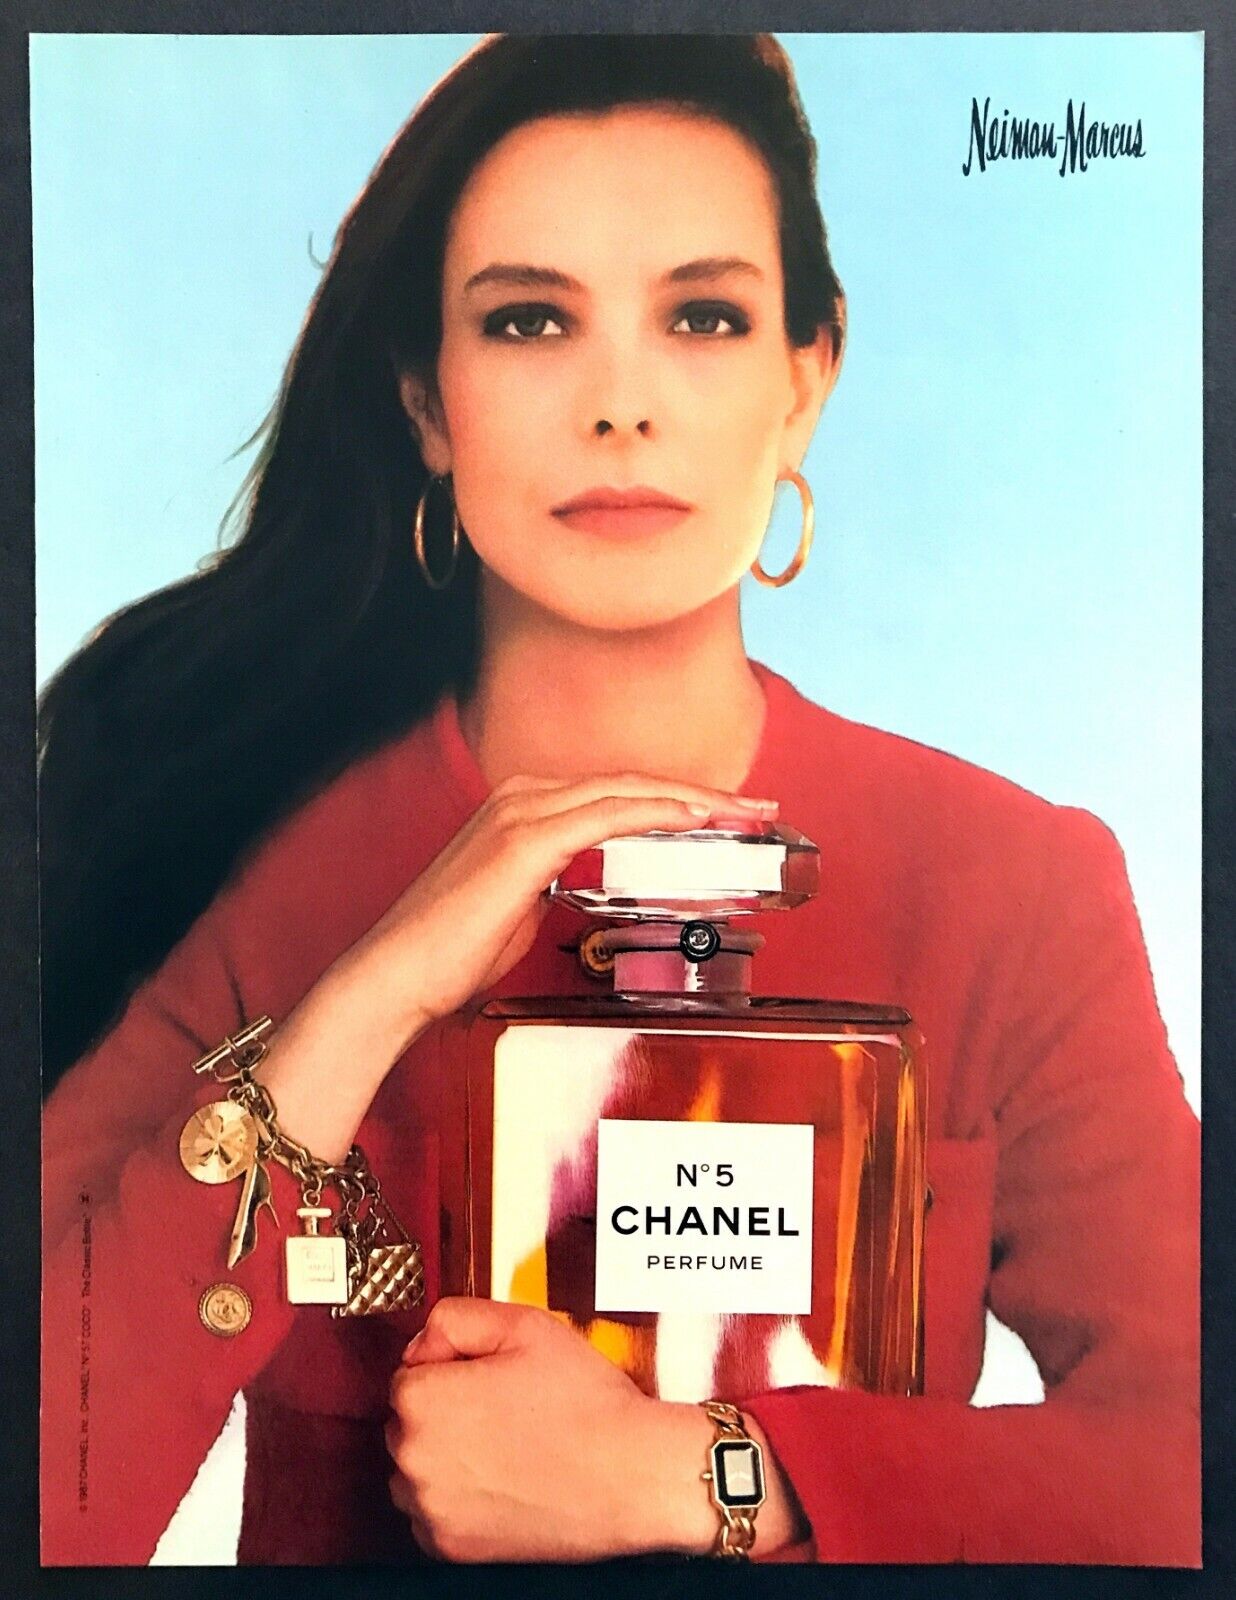 1987 Woman Holding Chanel No.5 Large Classic Perfume Bottle Photo Promo Print Ad